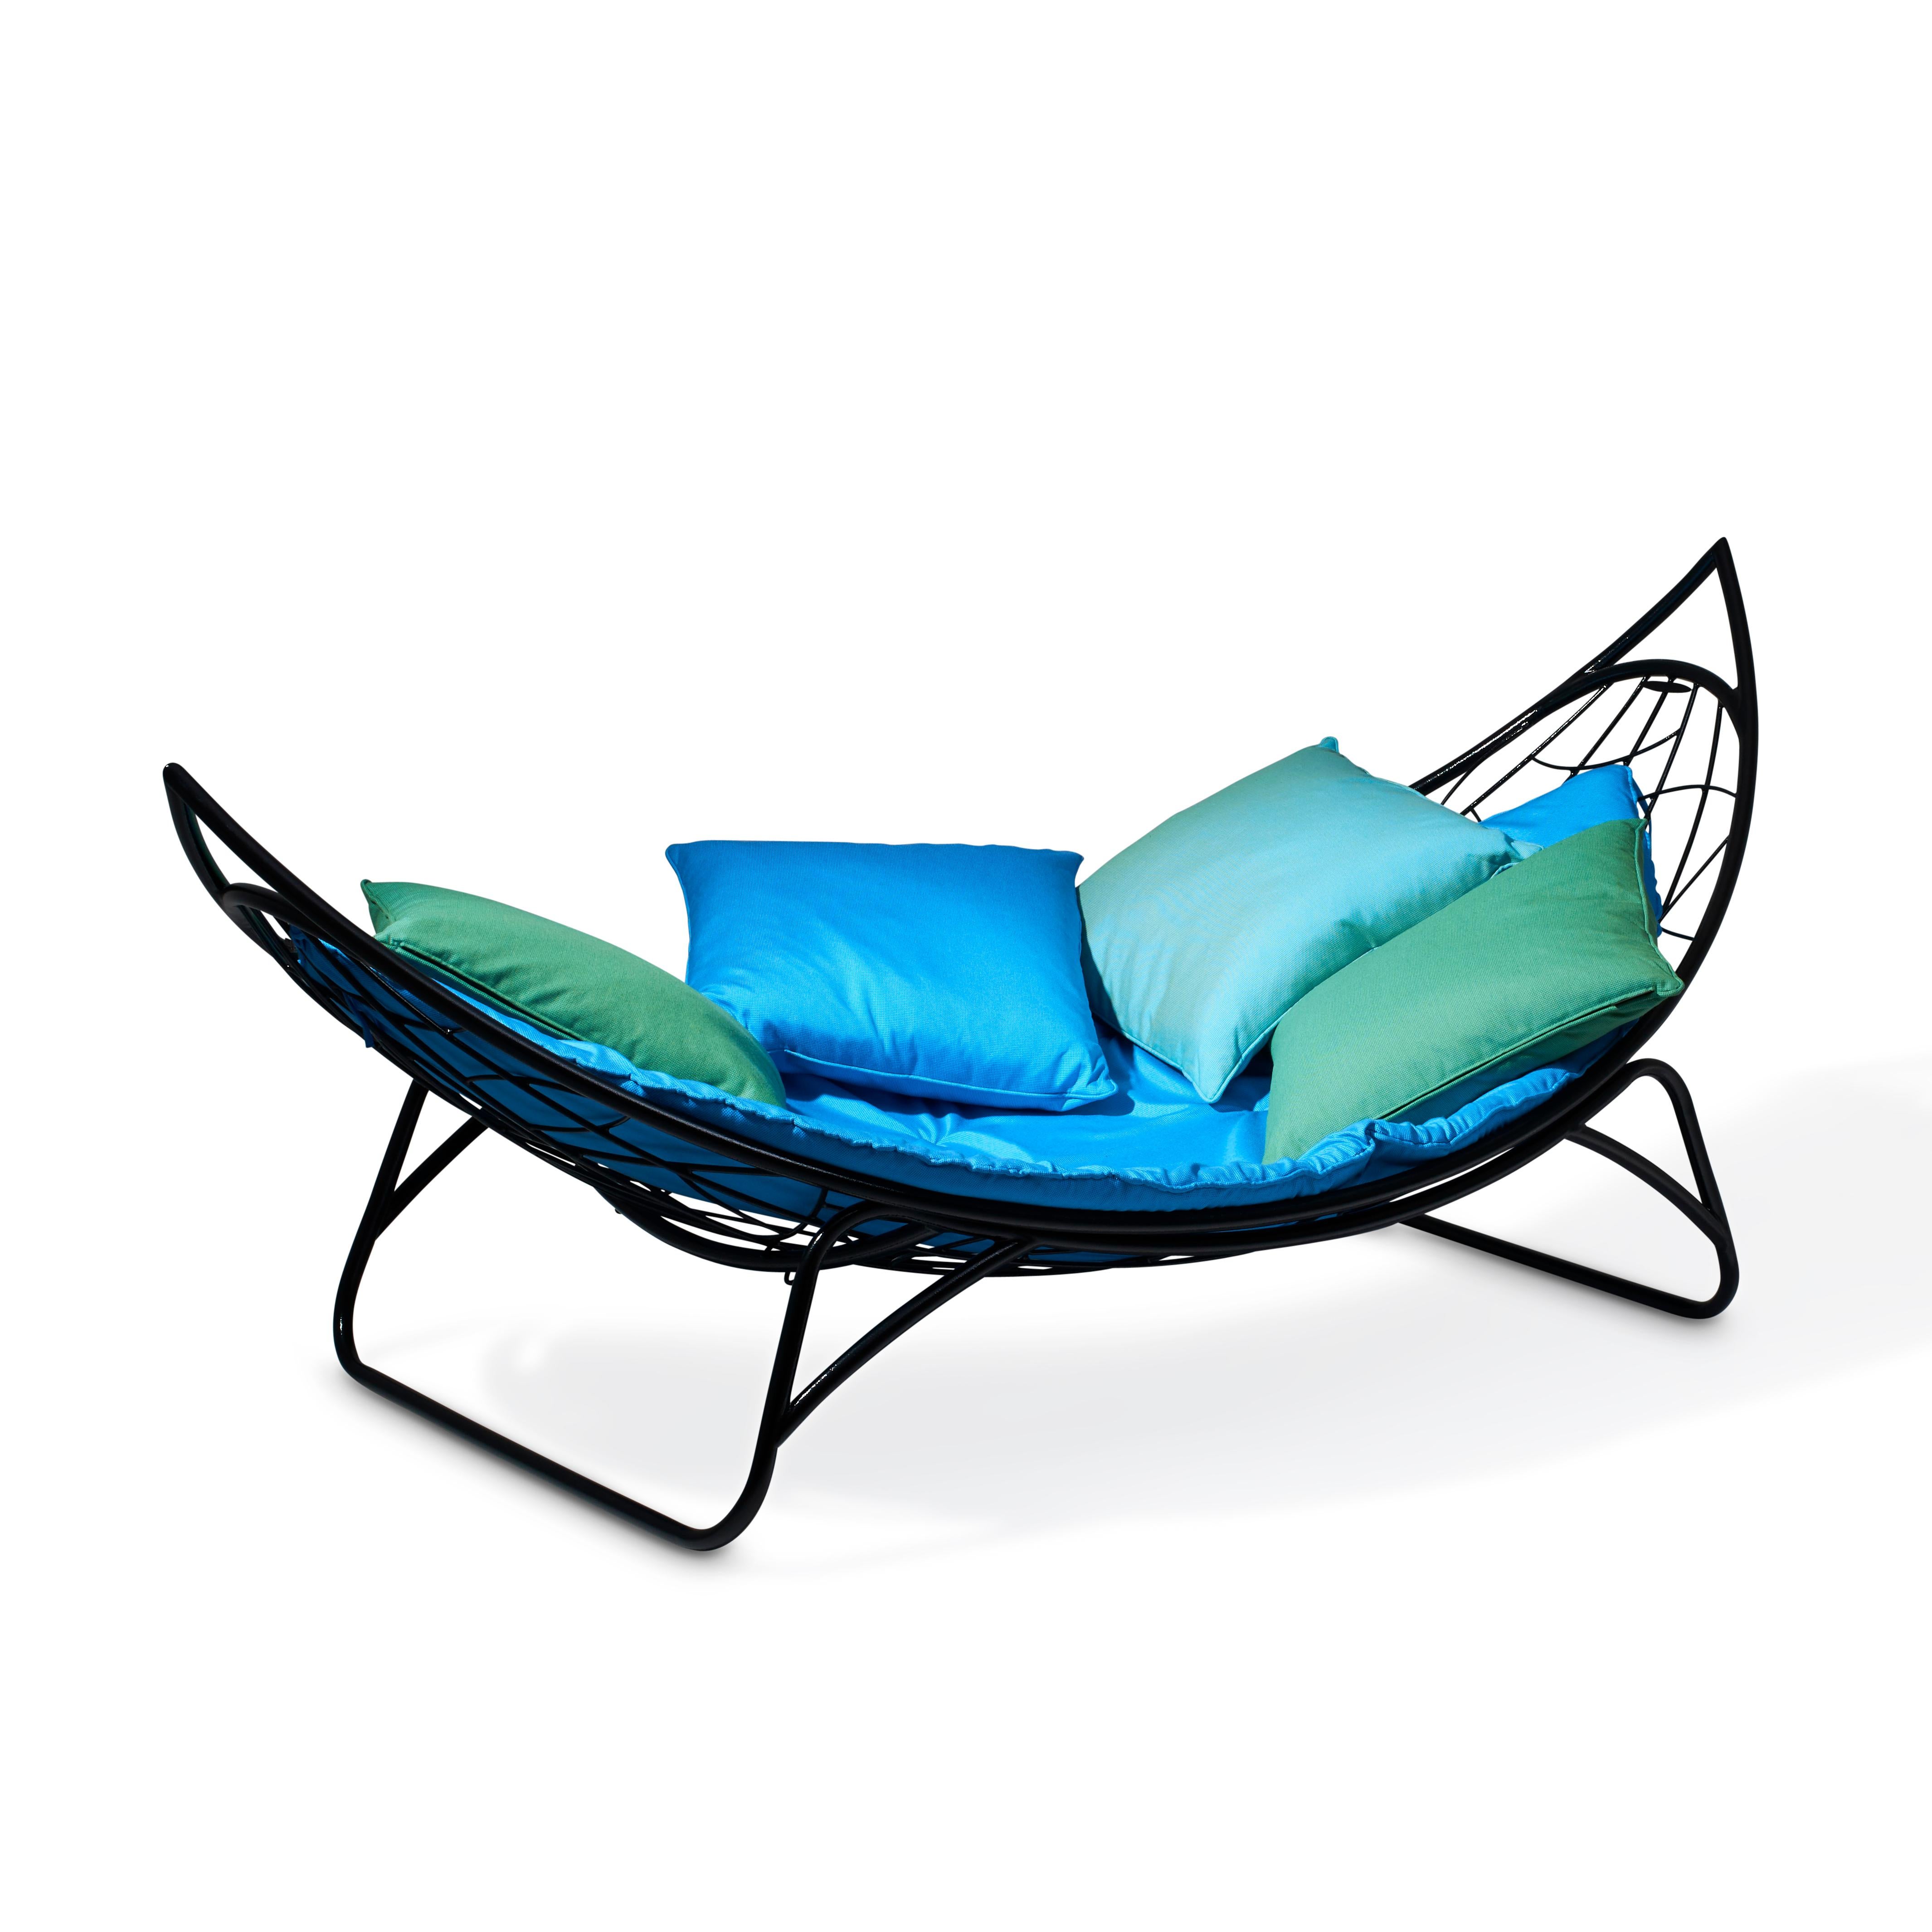 The Melon Lounger is inspired by a hammock - but with its structured hard frame it will not fold in and is thus hugely comfortable.
It’s organic shape is reminiscent of a slice of fruit like a melon.
It is spacious and comfortable with ample room